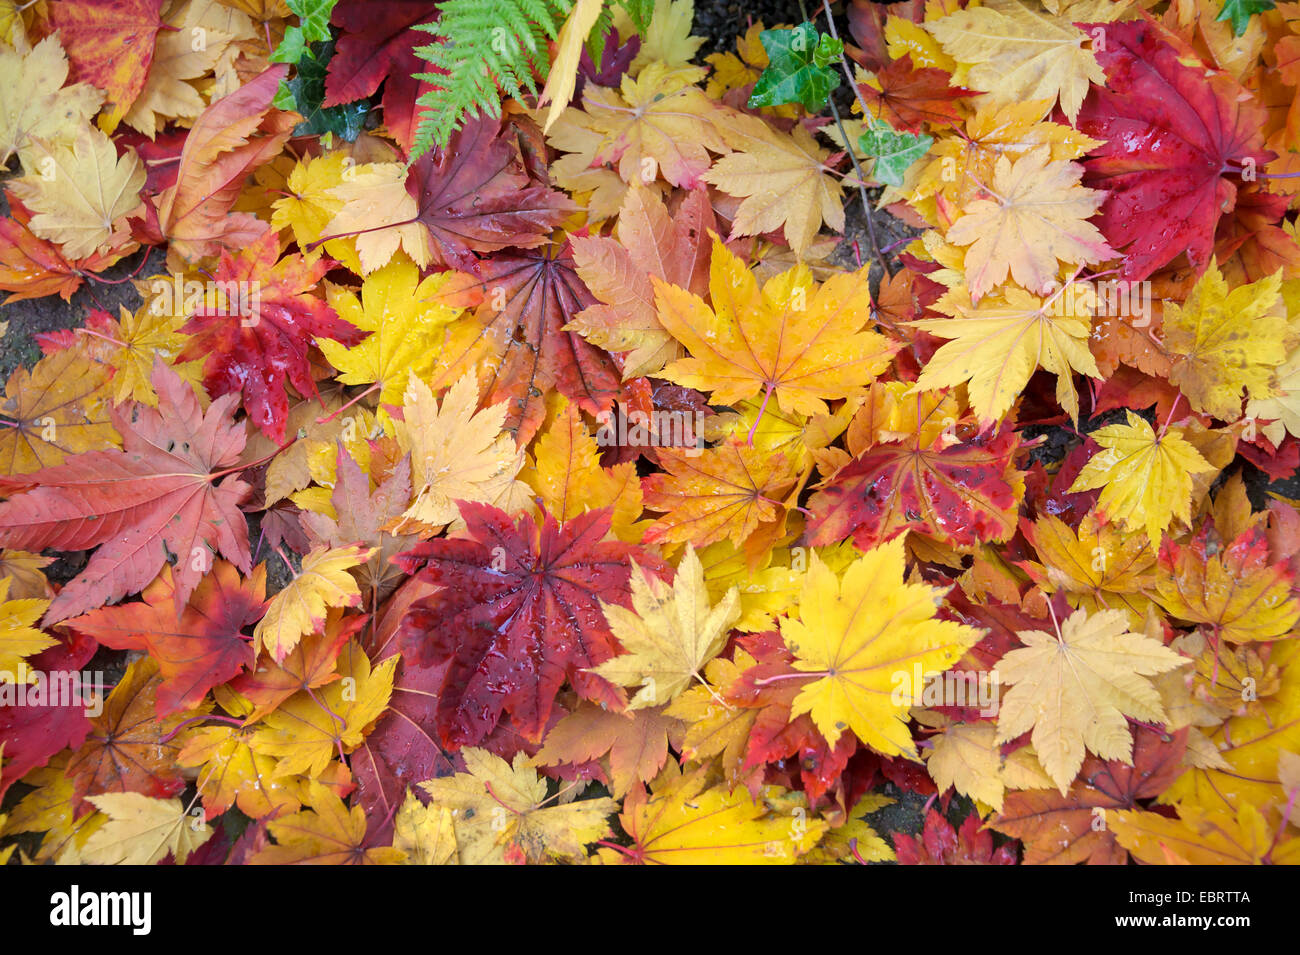 Japanese maple (Acer japonicum), autumn leaves on the ground Stock Photo